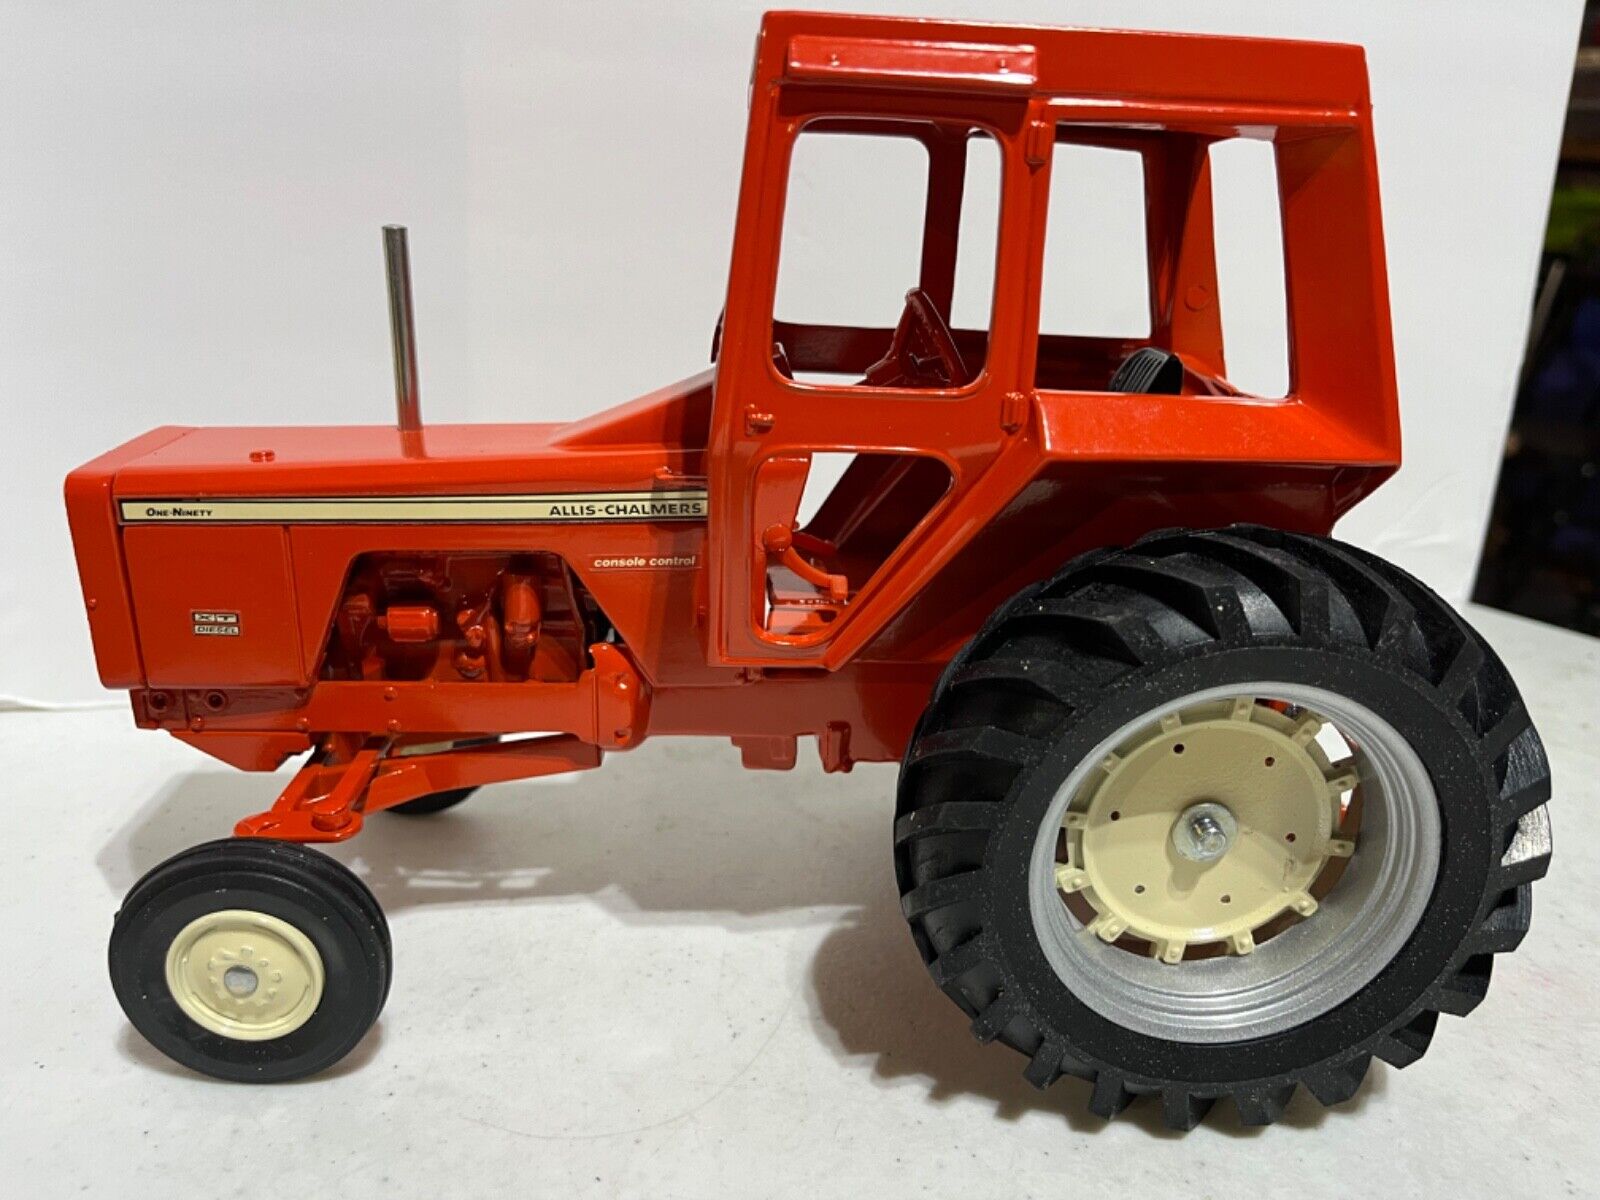 Allis Chalmers One Ninety XT Diesel Tractor Signed by Joseph Ertl 1/16 by Scale